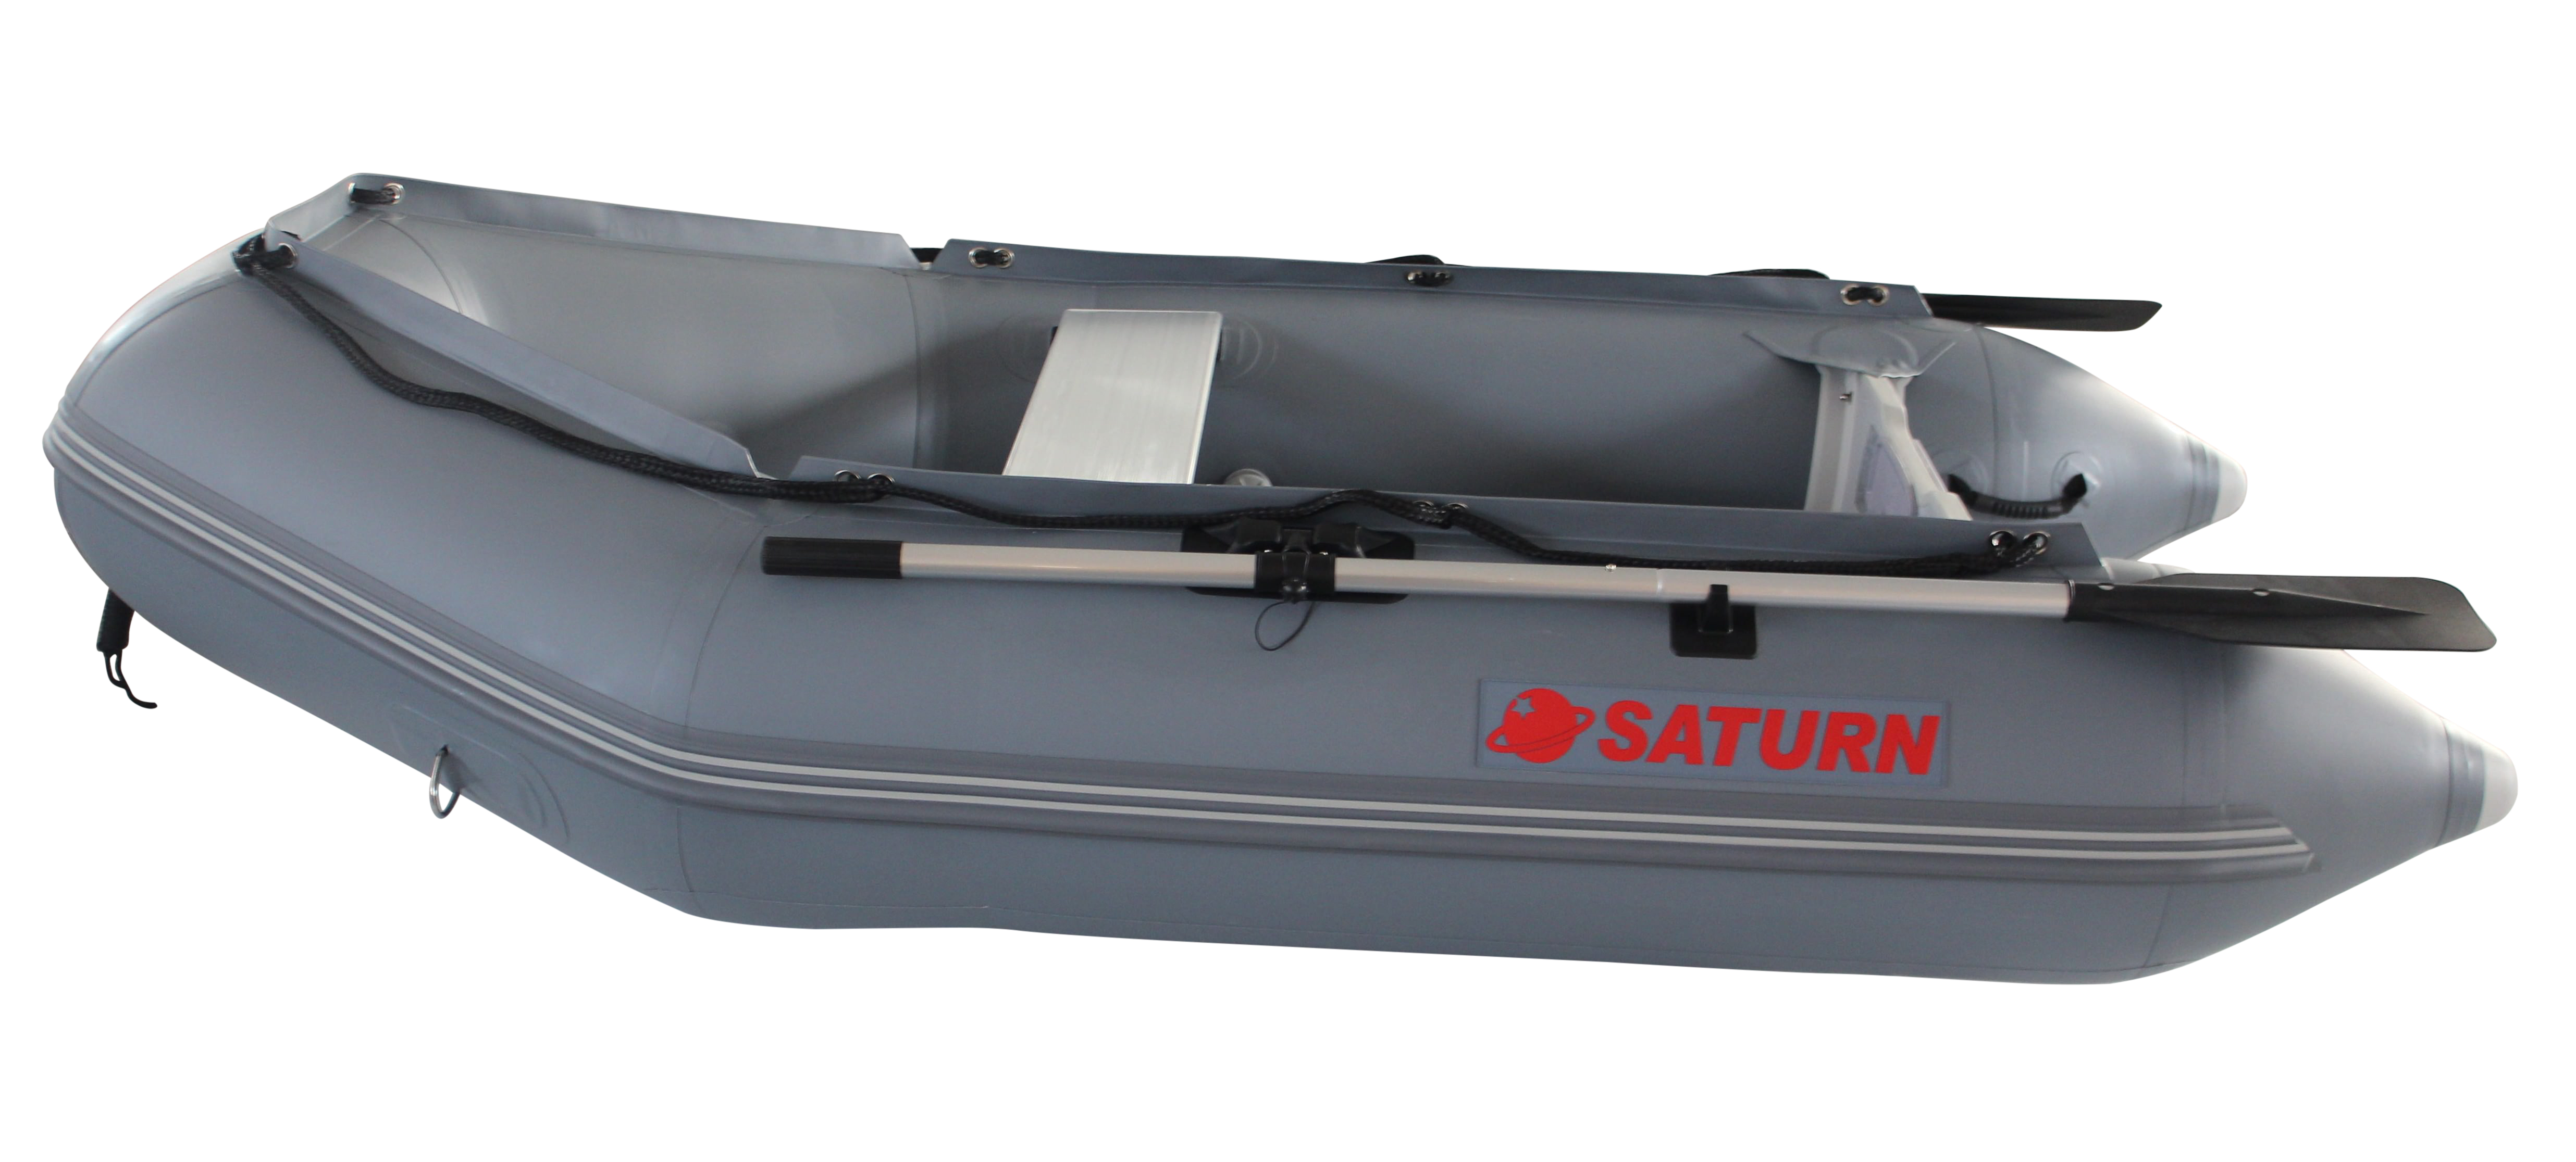 8.6' Mars Inflatable Boat made by Saturn Best Inflatable Boats Rafts & Tenders